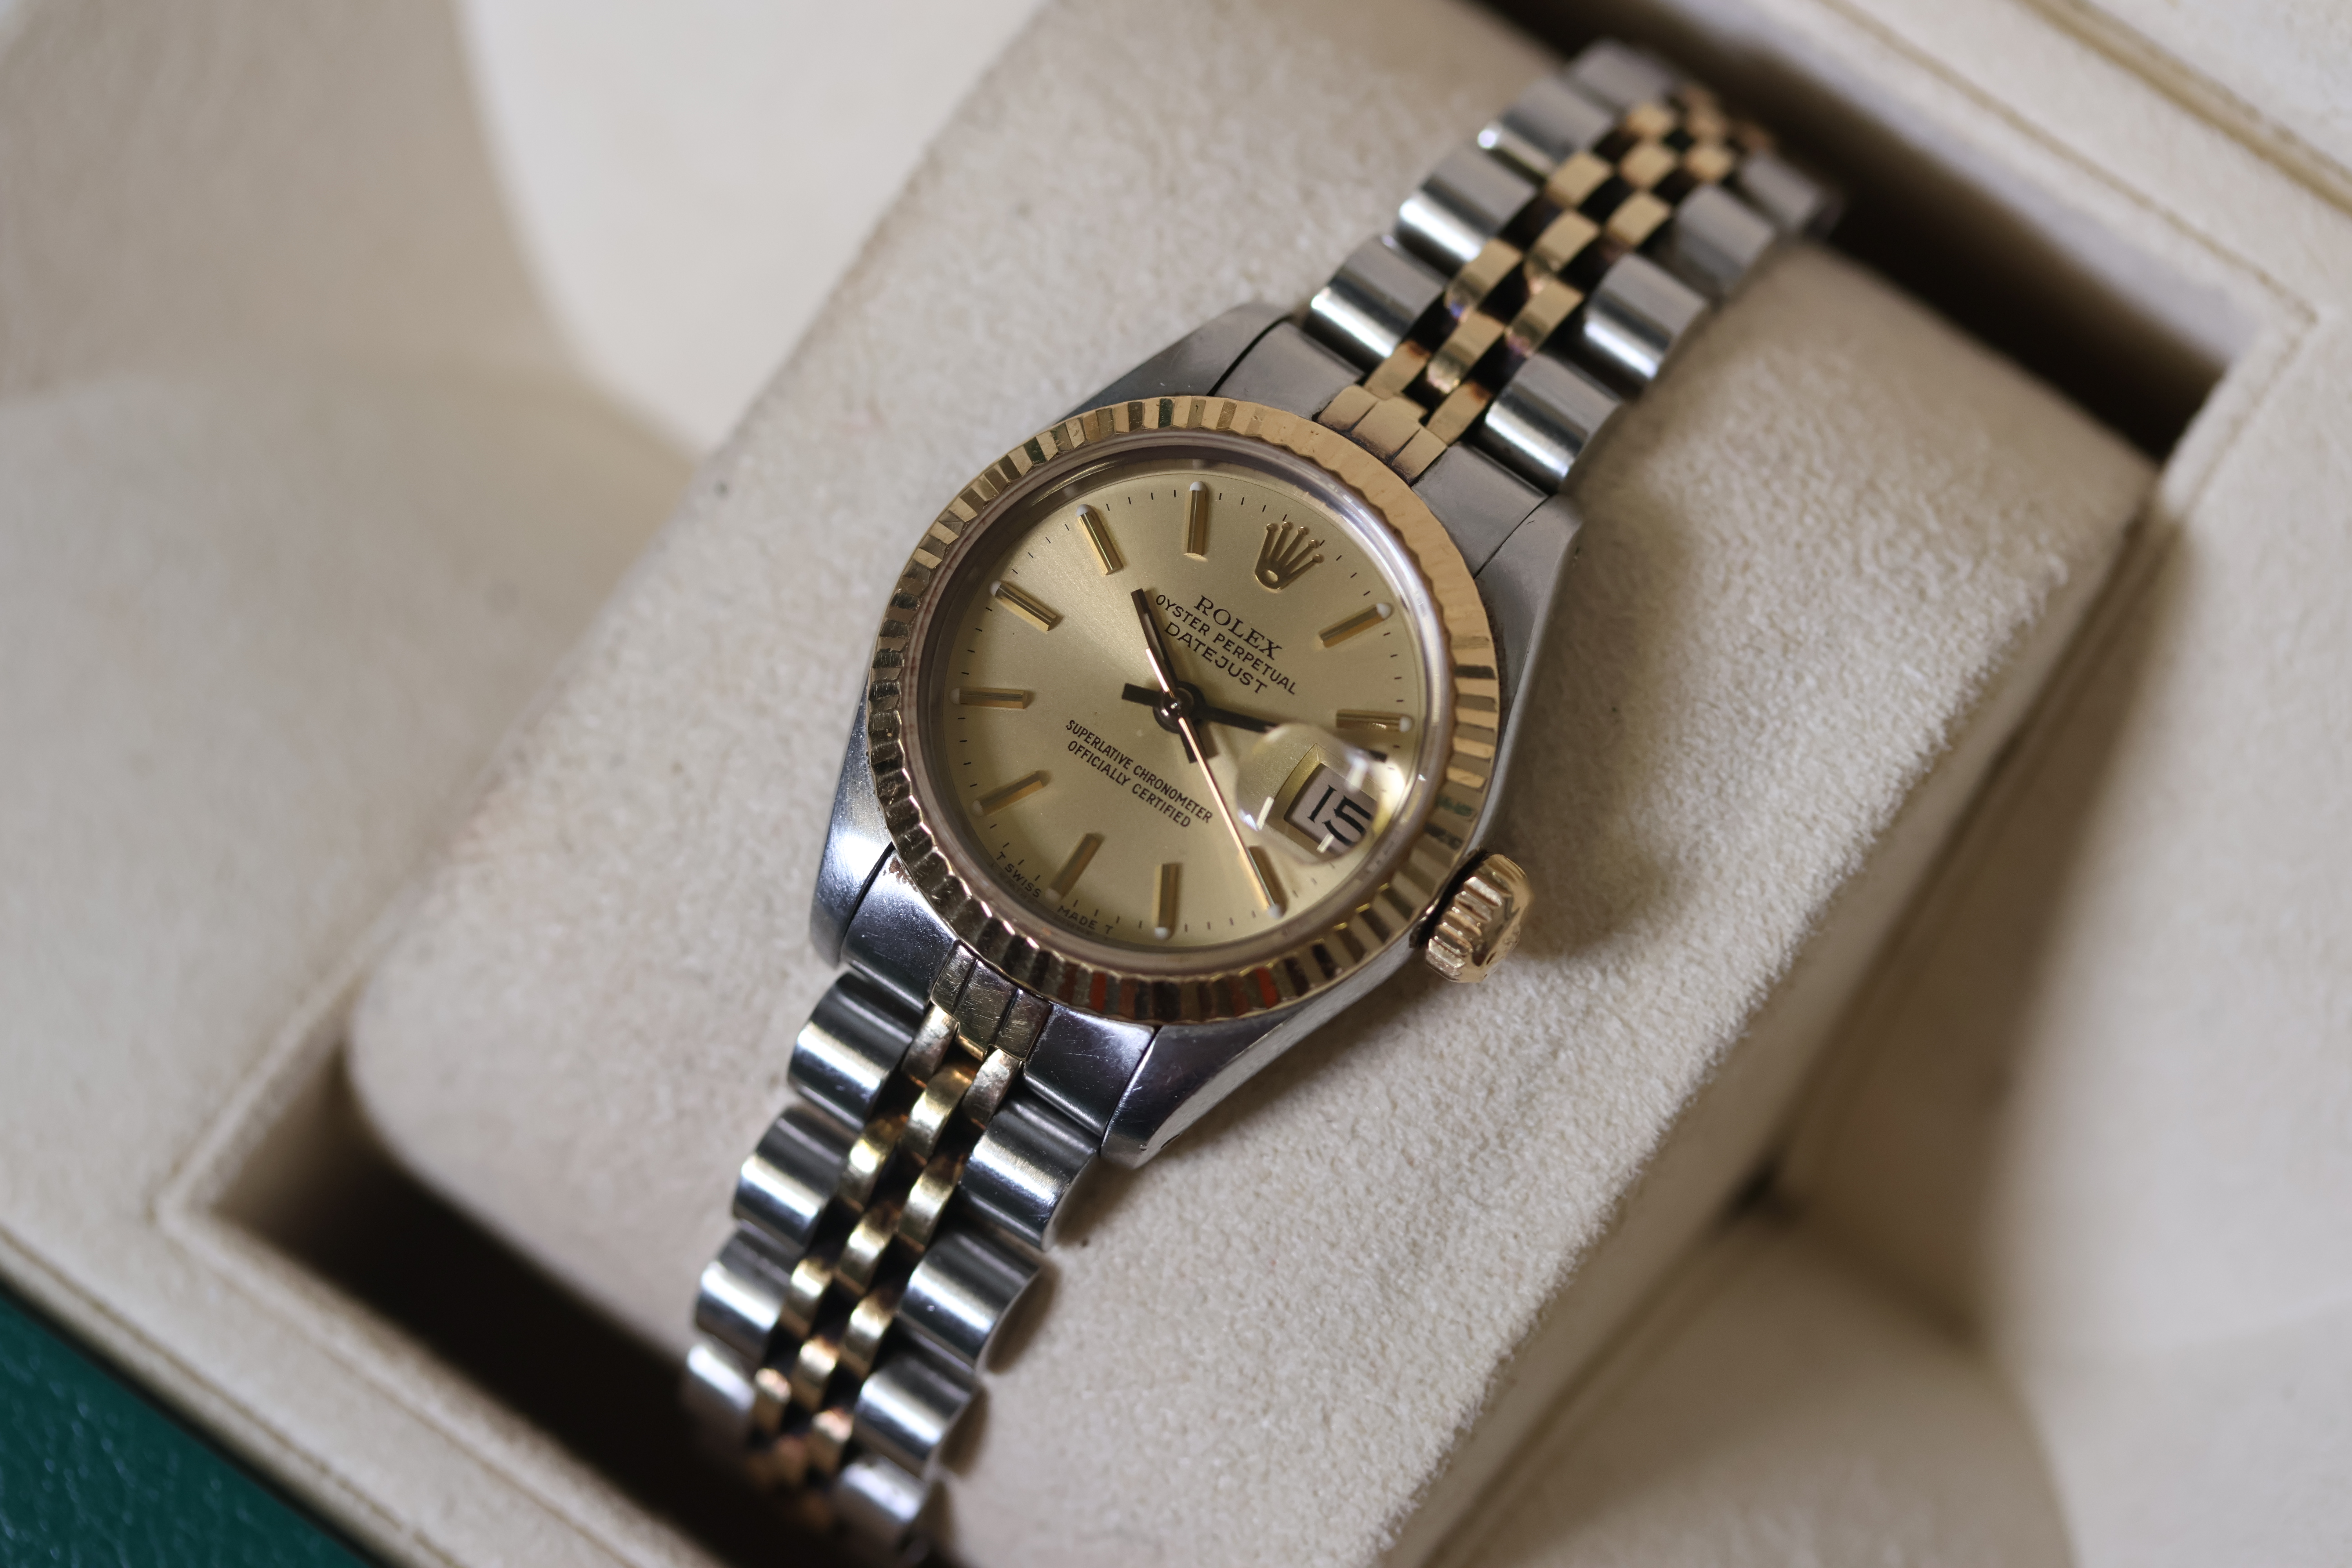 Ladies Rolex Datejust 26 Reference 69173 Box and Papers 1988 - Image 6 of 6